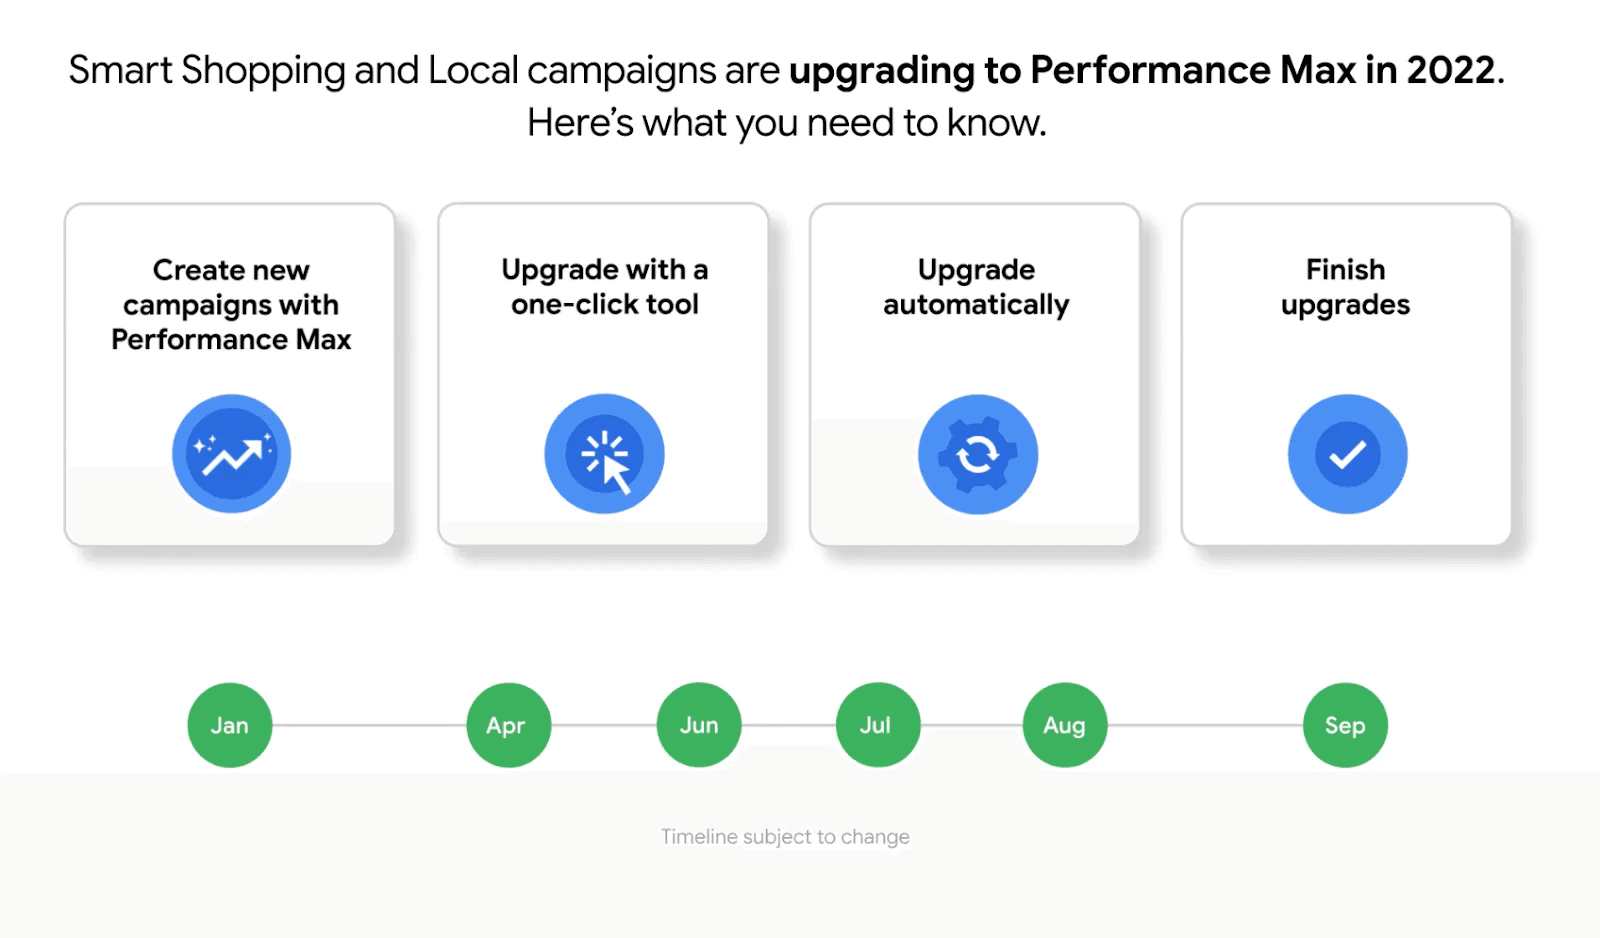 Google's timeline of Performance Max campaign upgrades in 2022.